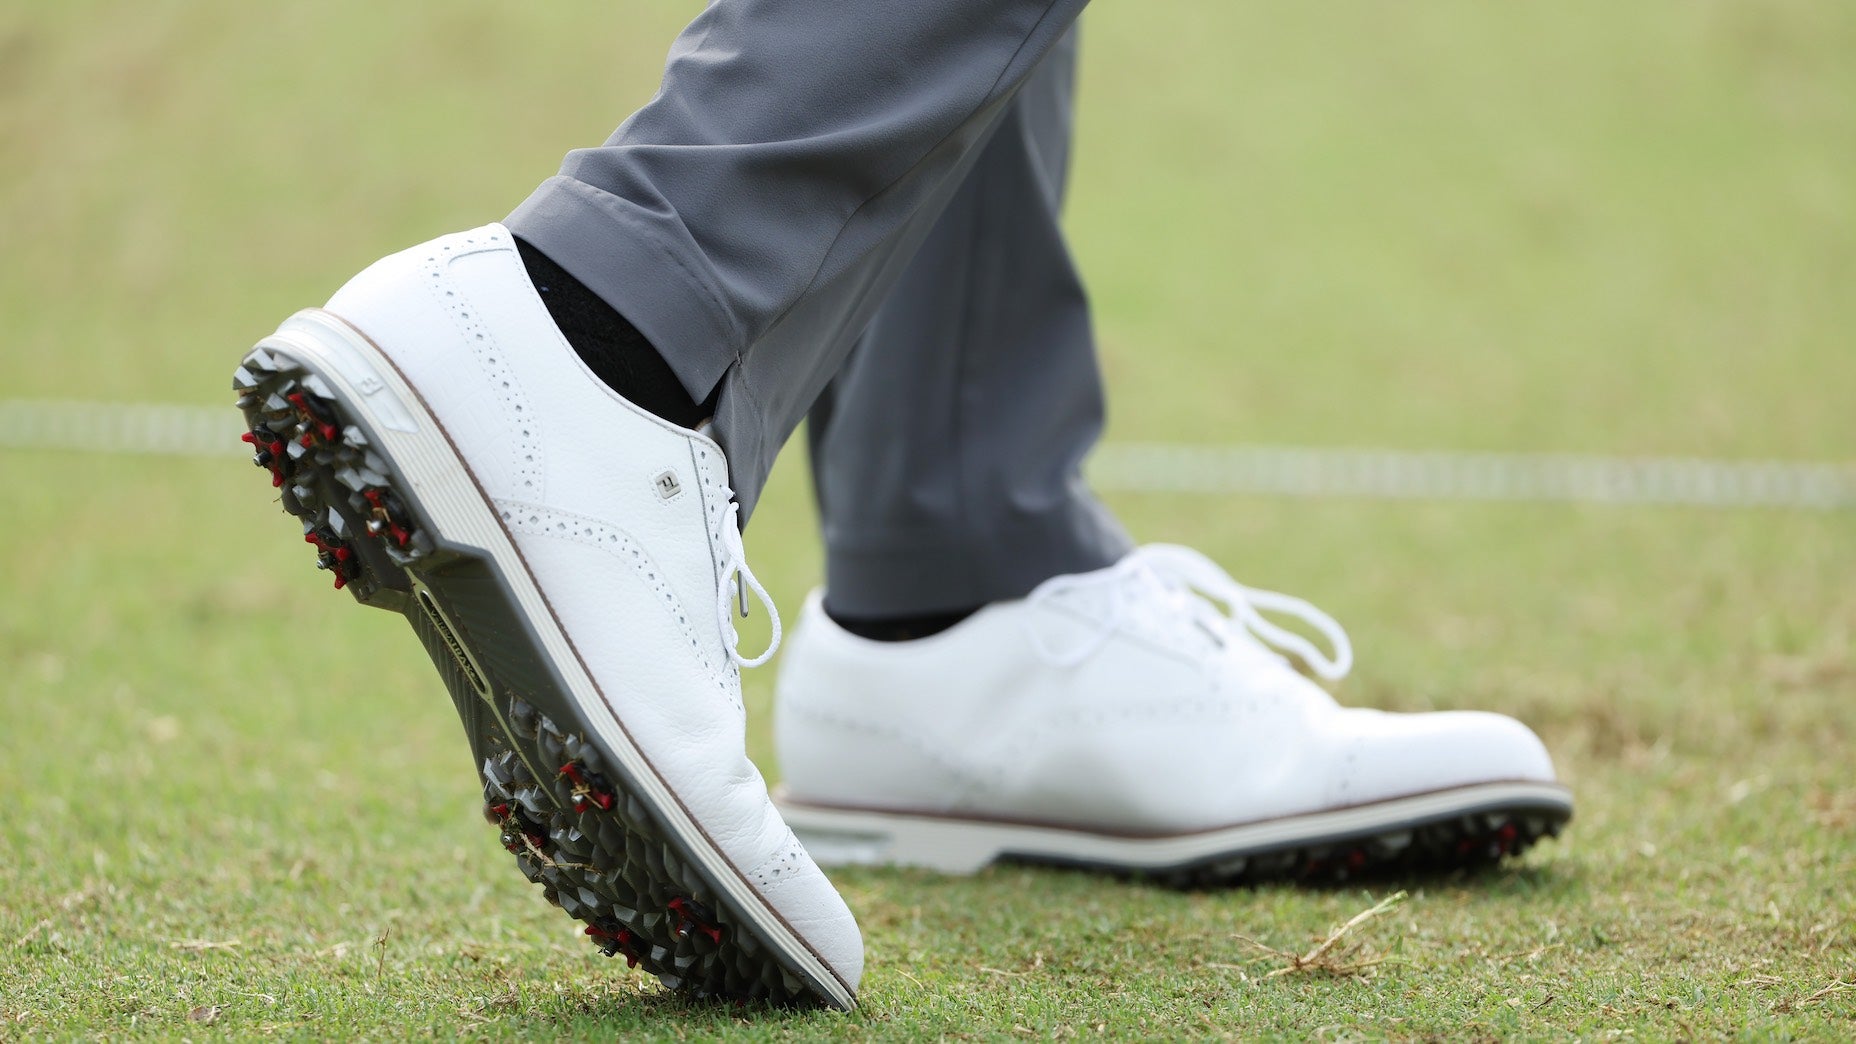 How many tour pros still wear metal spikes? | Fully Equipped mailbag